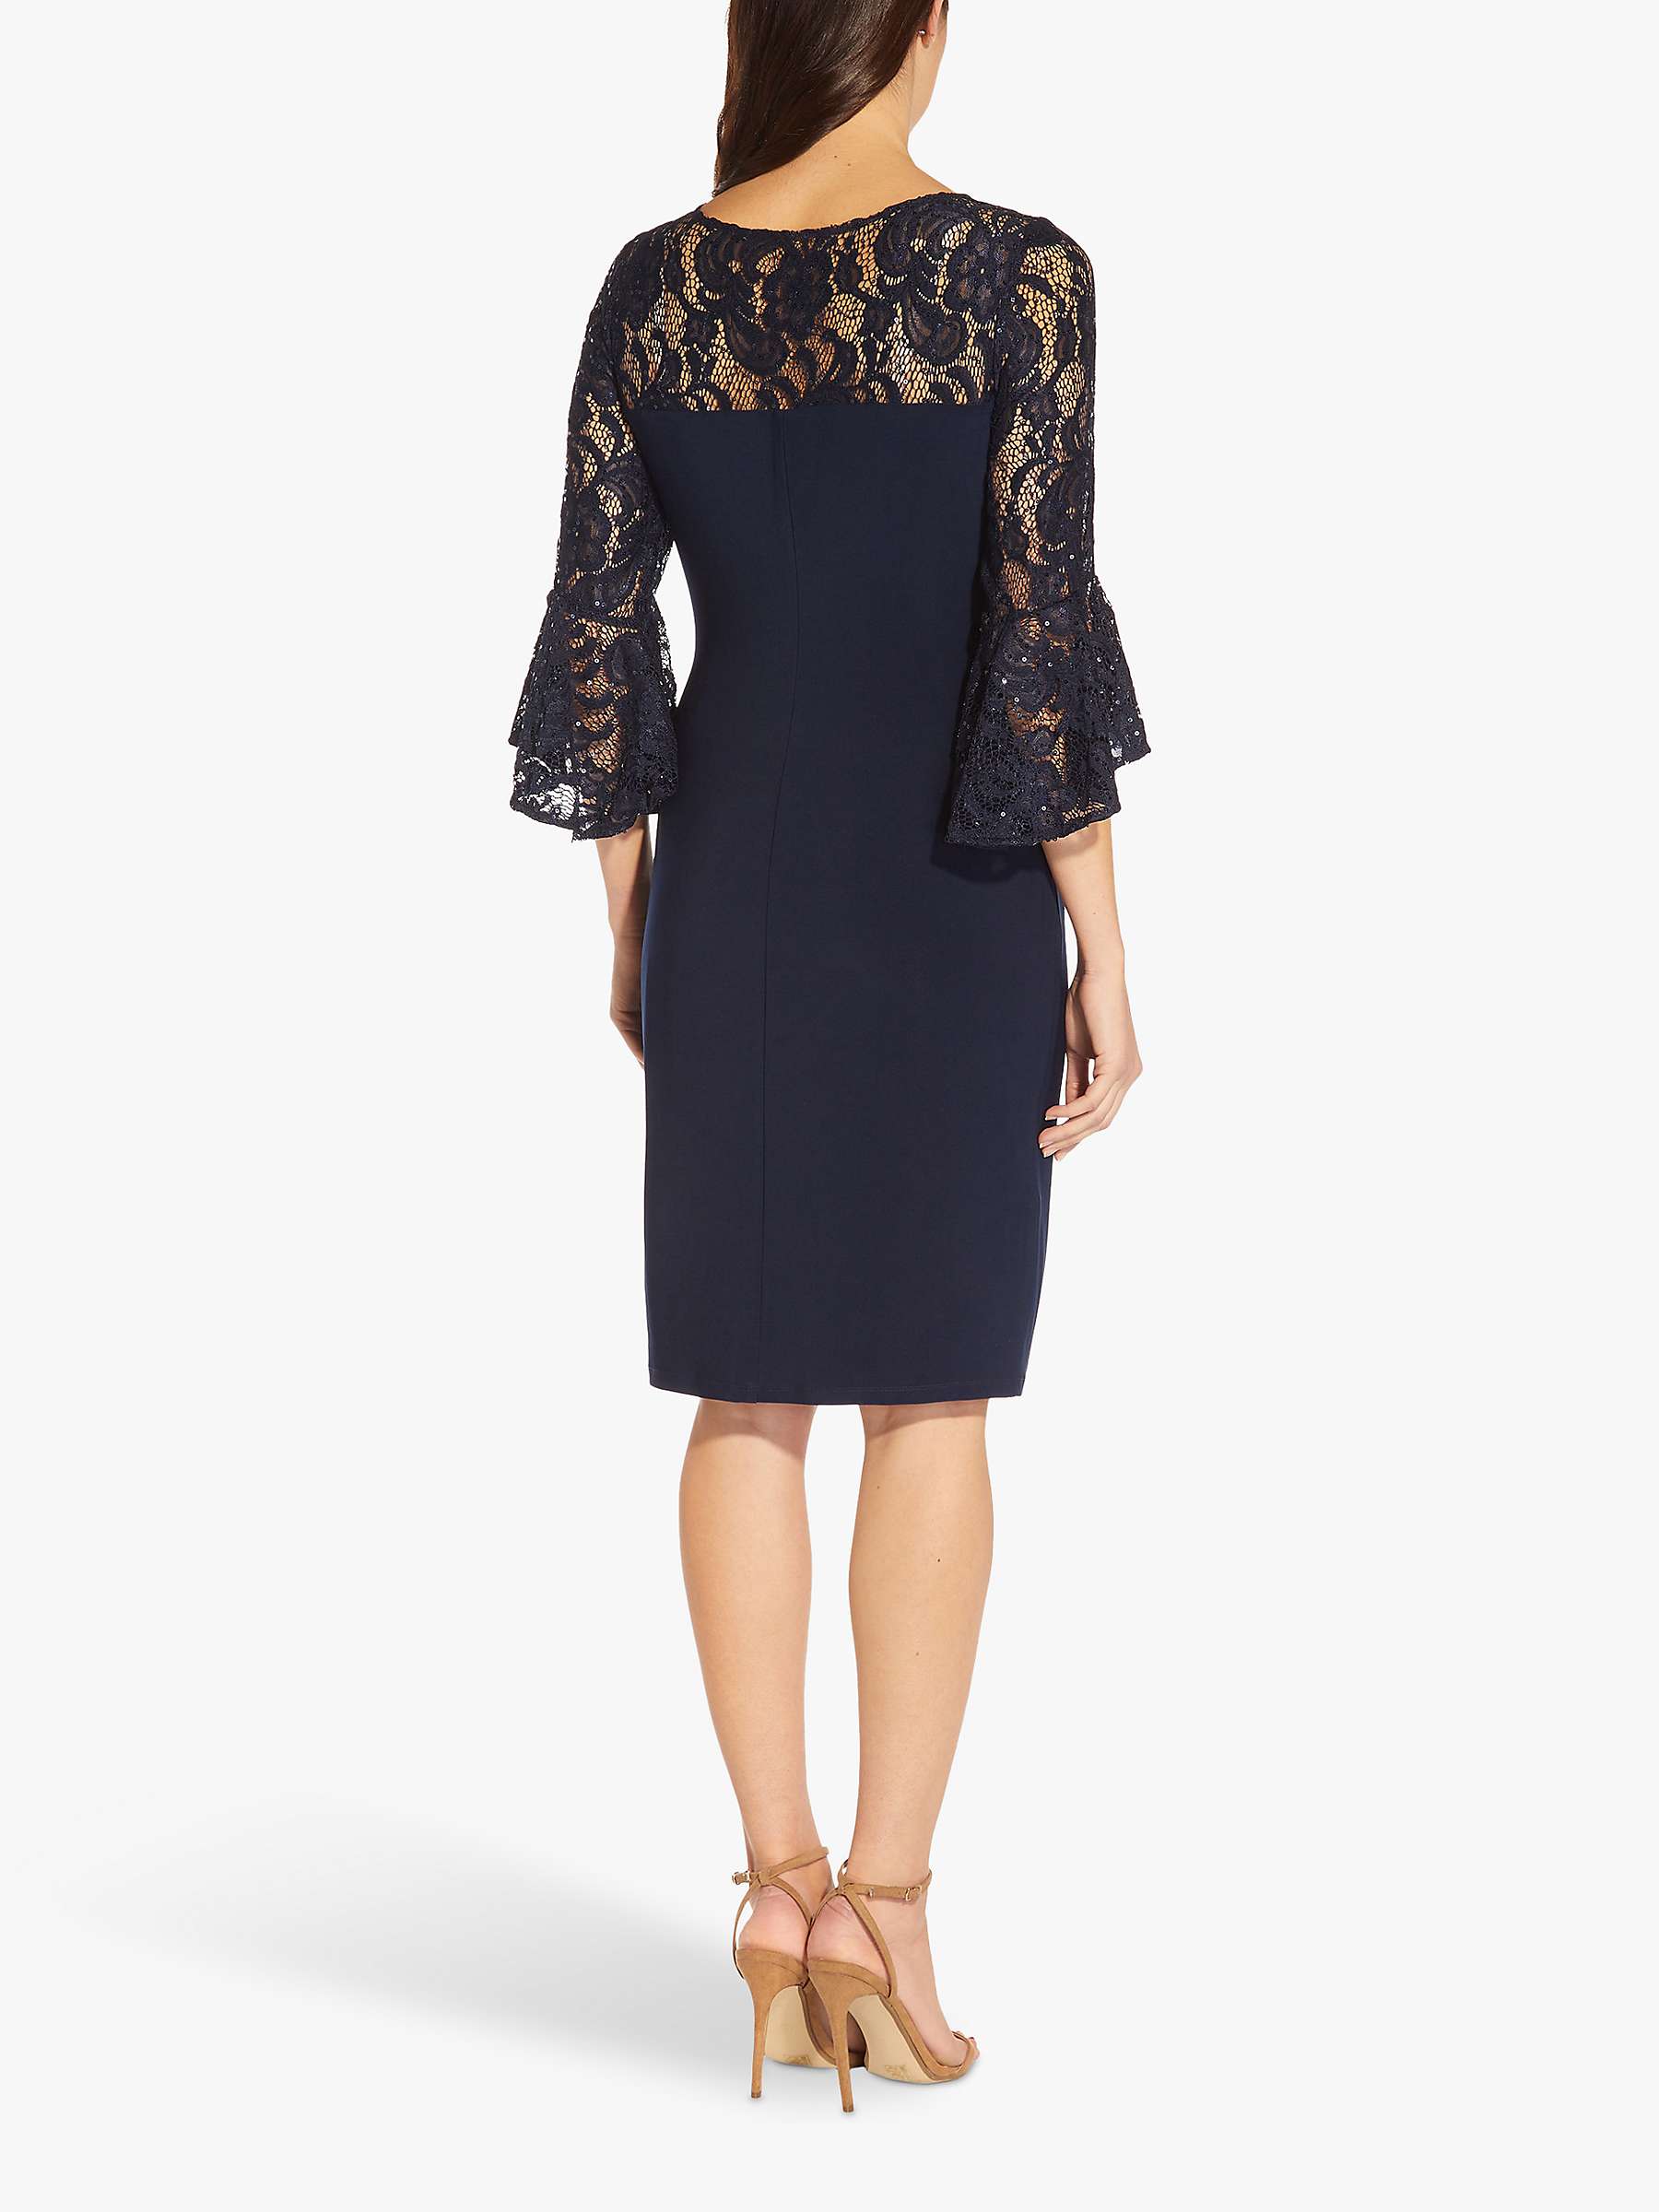 Buy Adrianna Papell Lace Jersey Knee Length Sheath Dress, Midnight Blue Online at johnlewis.com